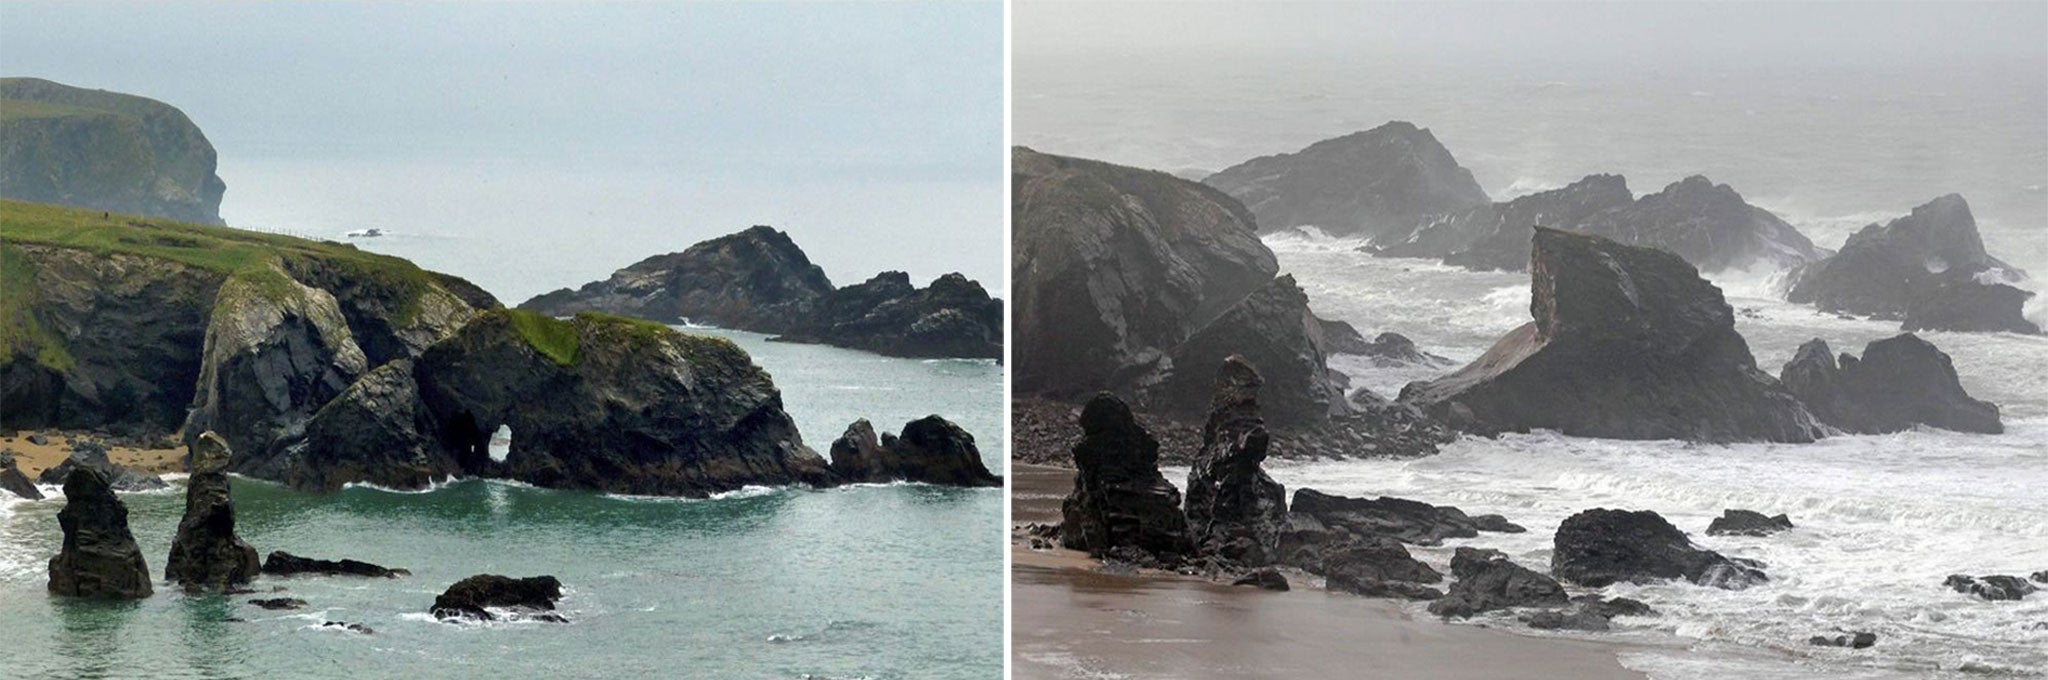 The site of the rock arch at Porthcothan Bay before (L) and after it was destroyed by the recent storms